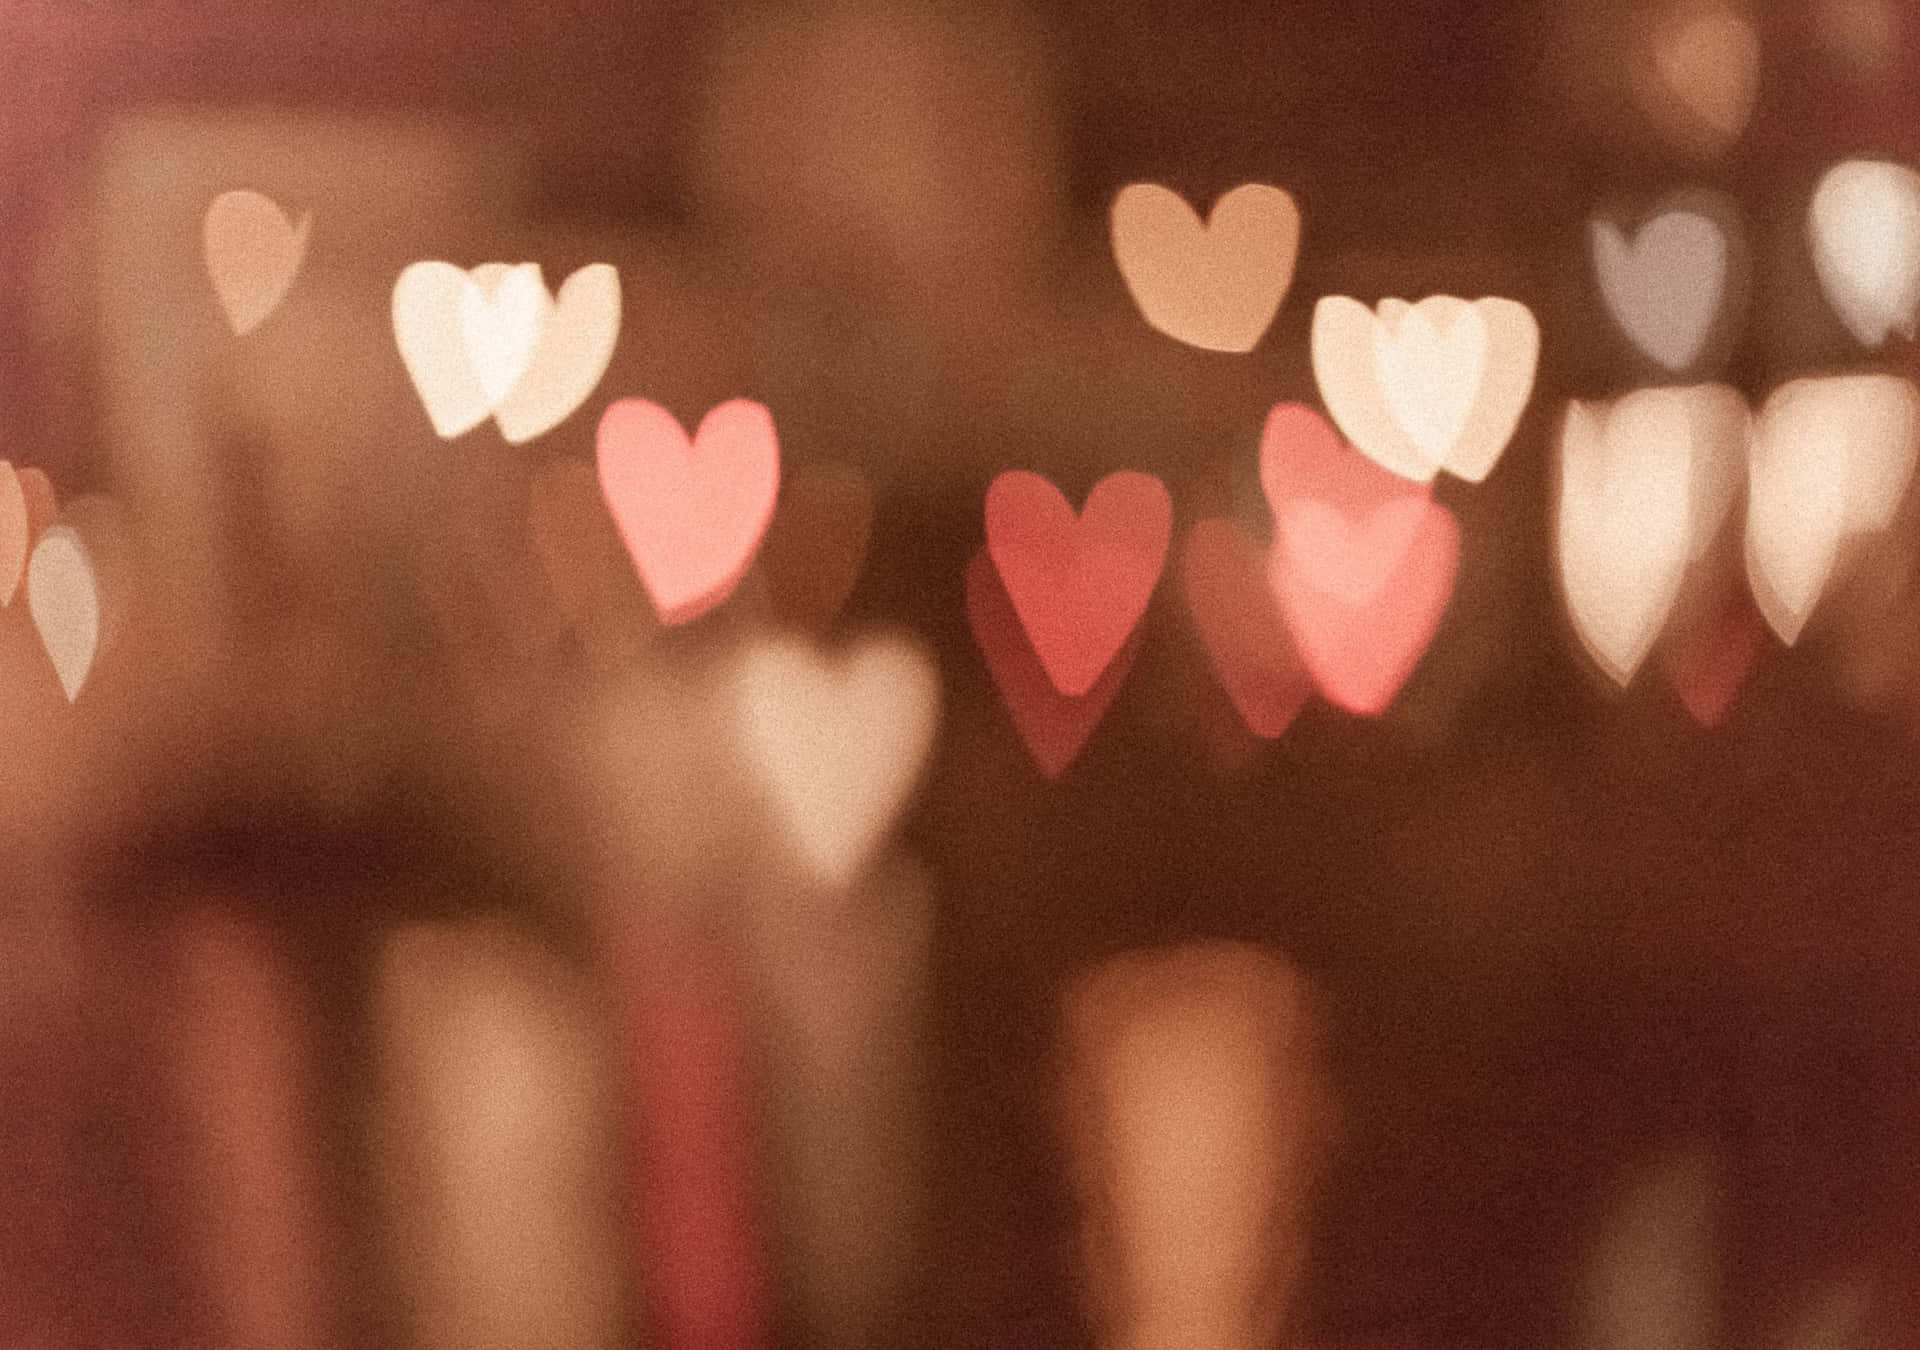 A Blurred Image Of Hearts On A Dark Background Wallpaper